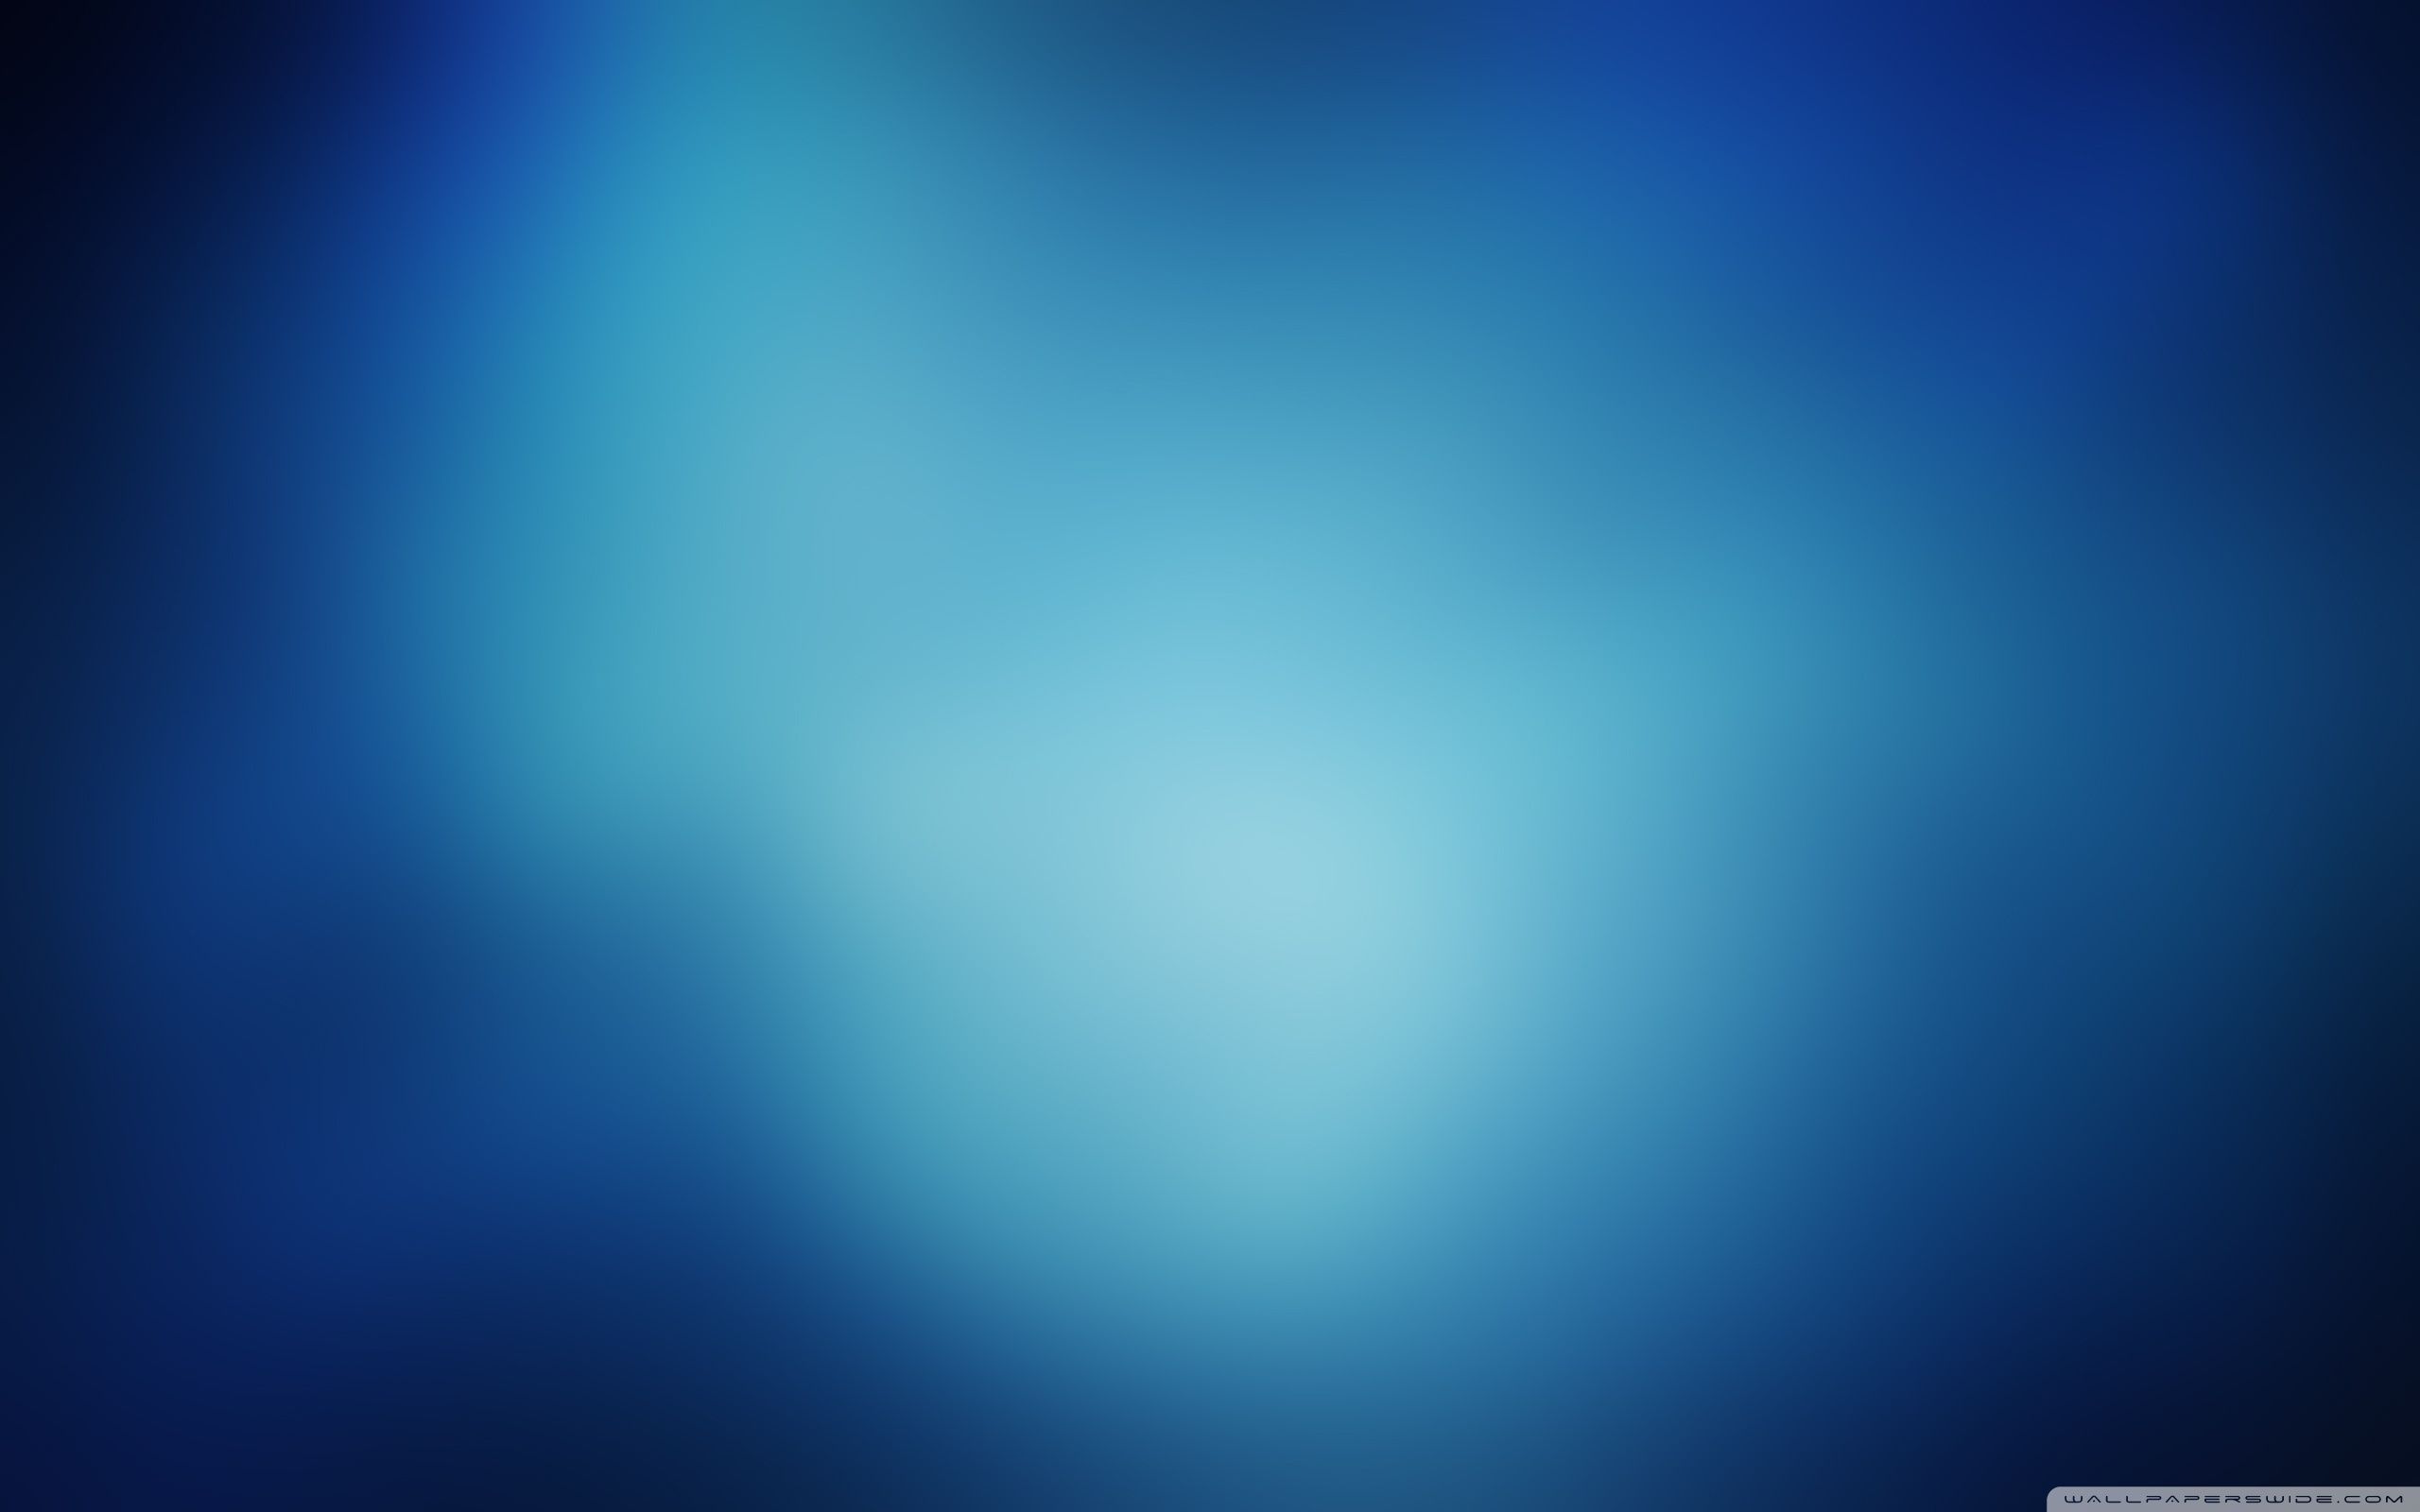 cool Blue Gradient Background Computer Wallpaper in 2019 Free